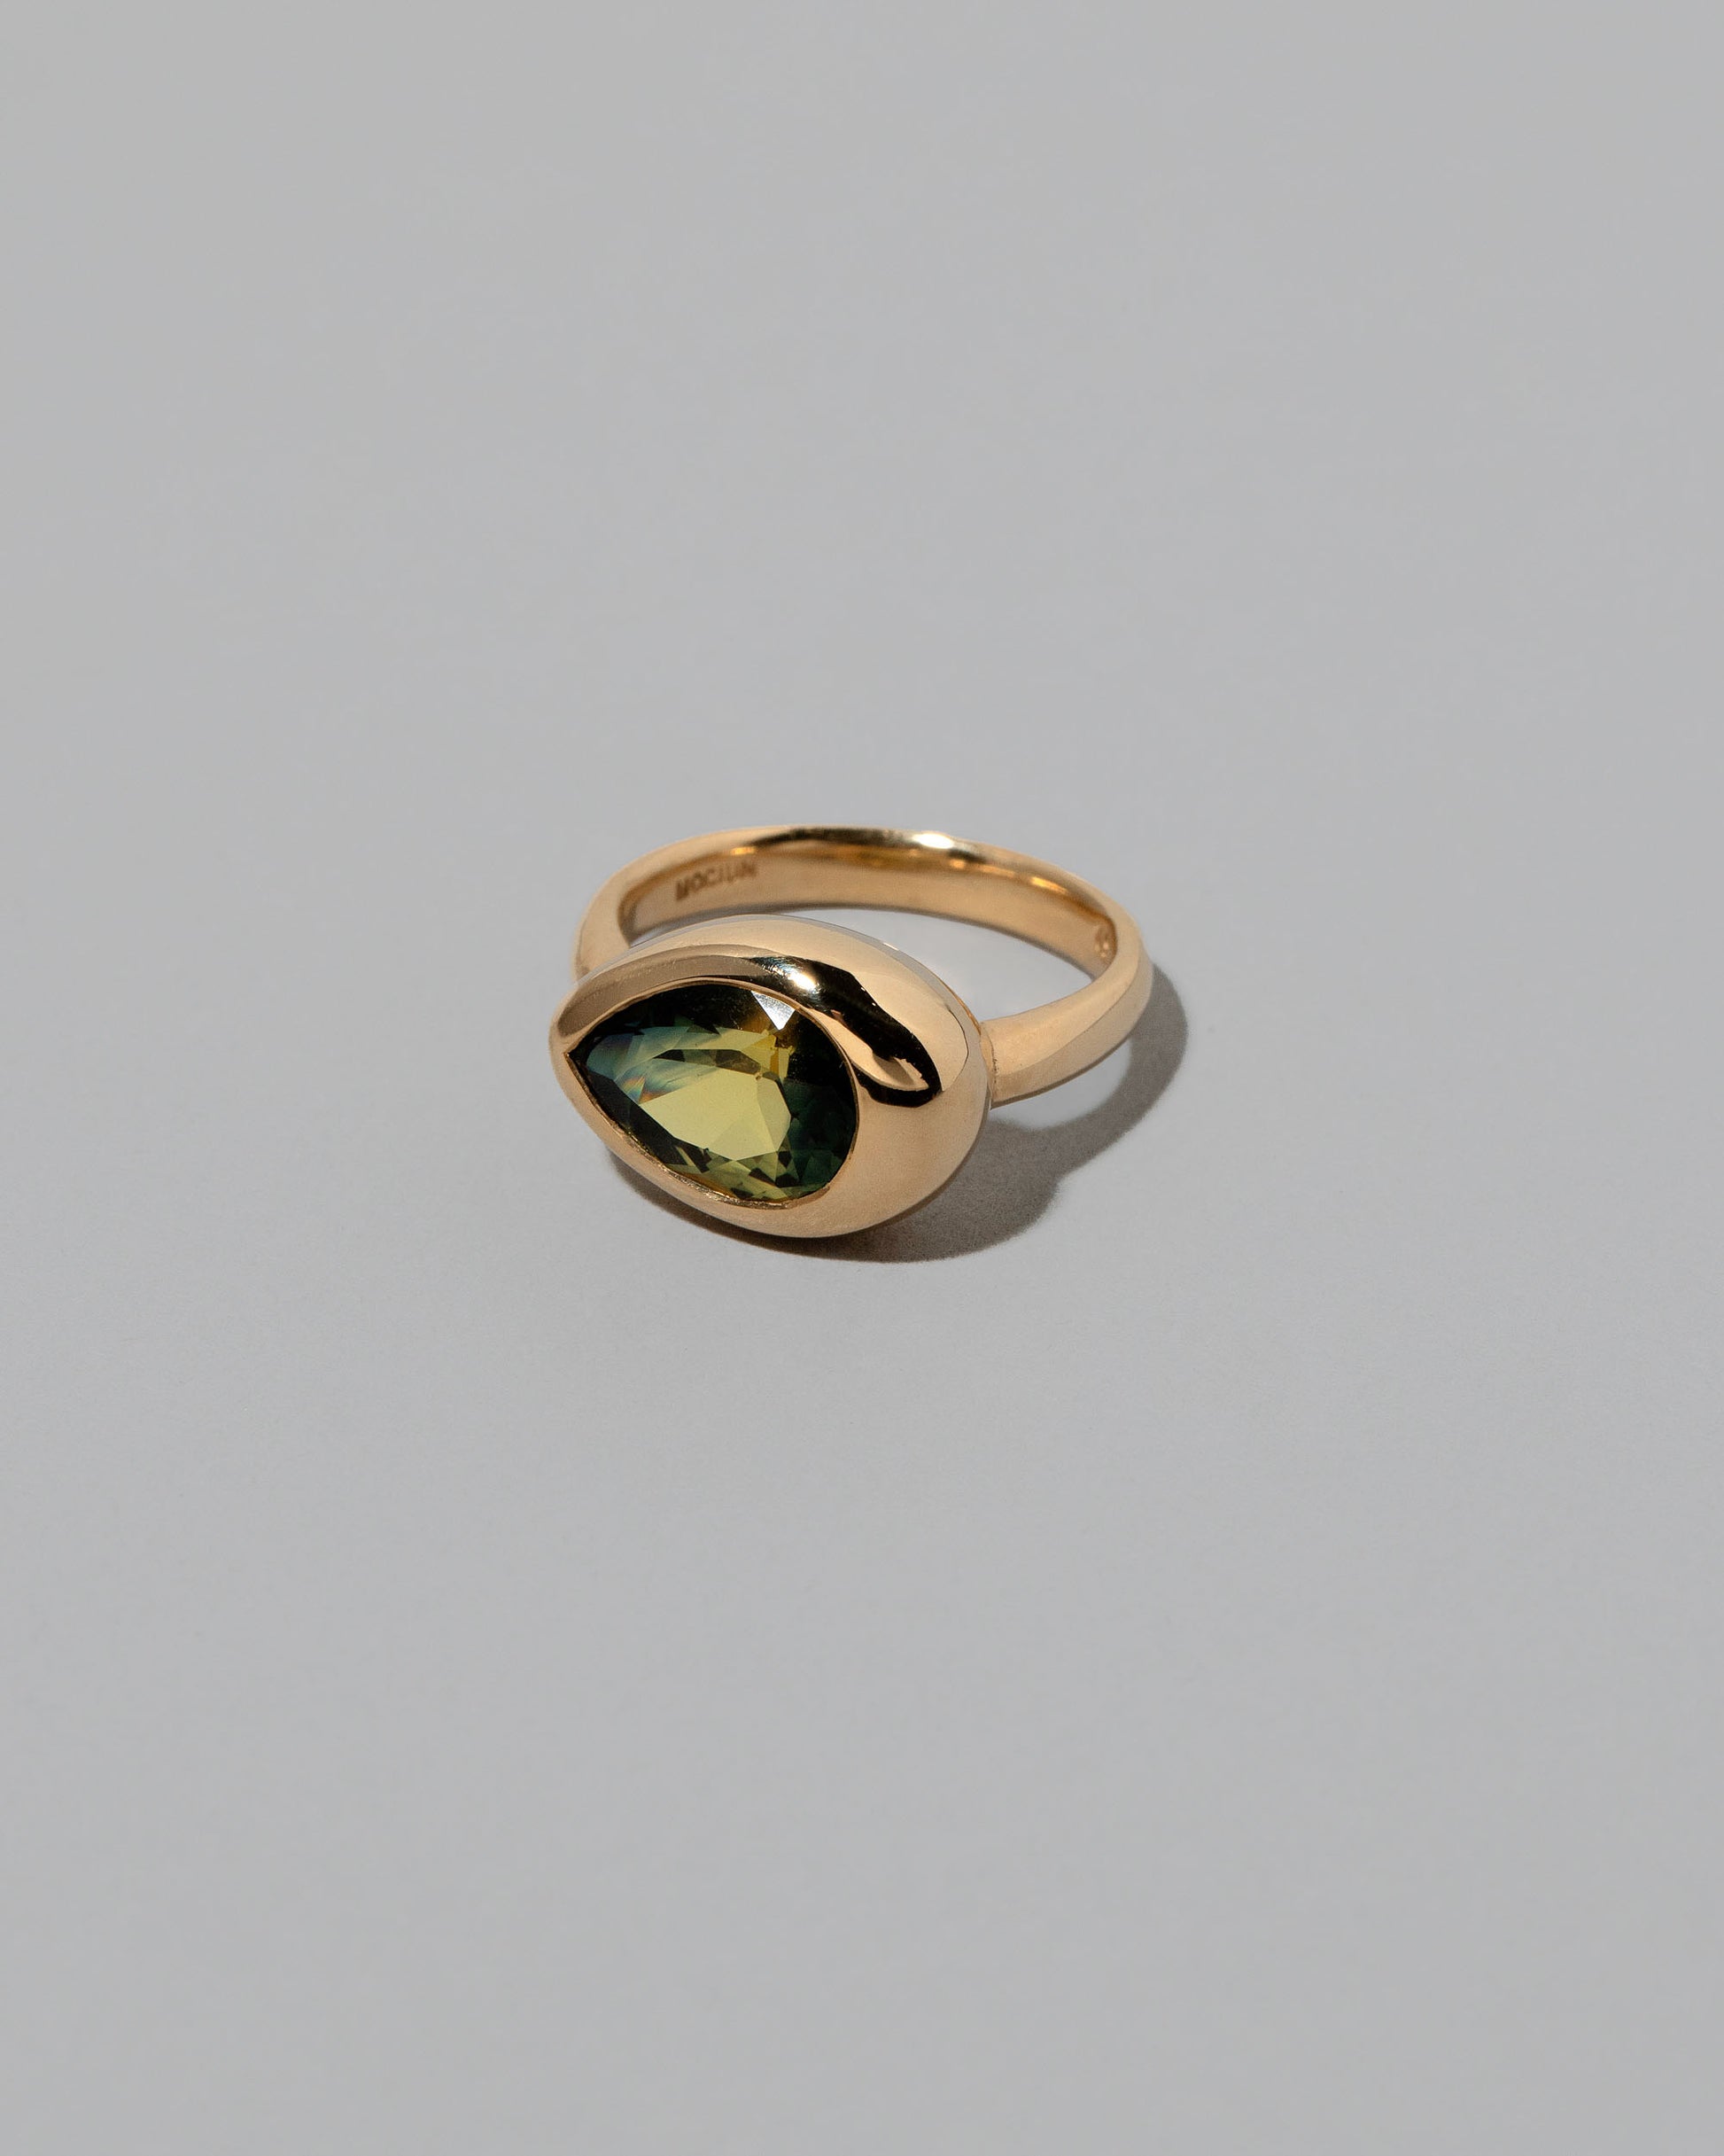 View from the side of the Bicolor Sapphire Grand Align Ring on light color background.